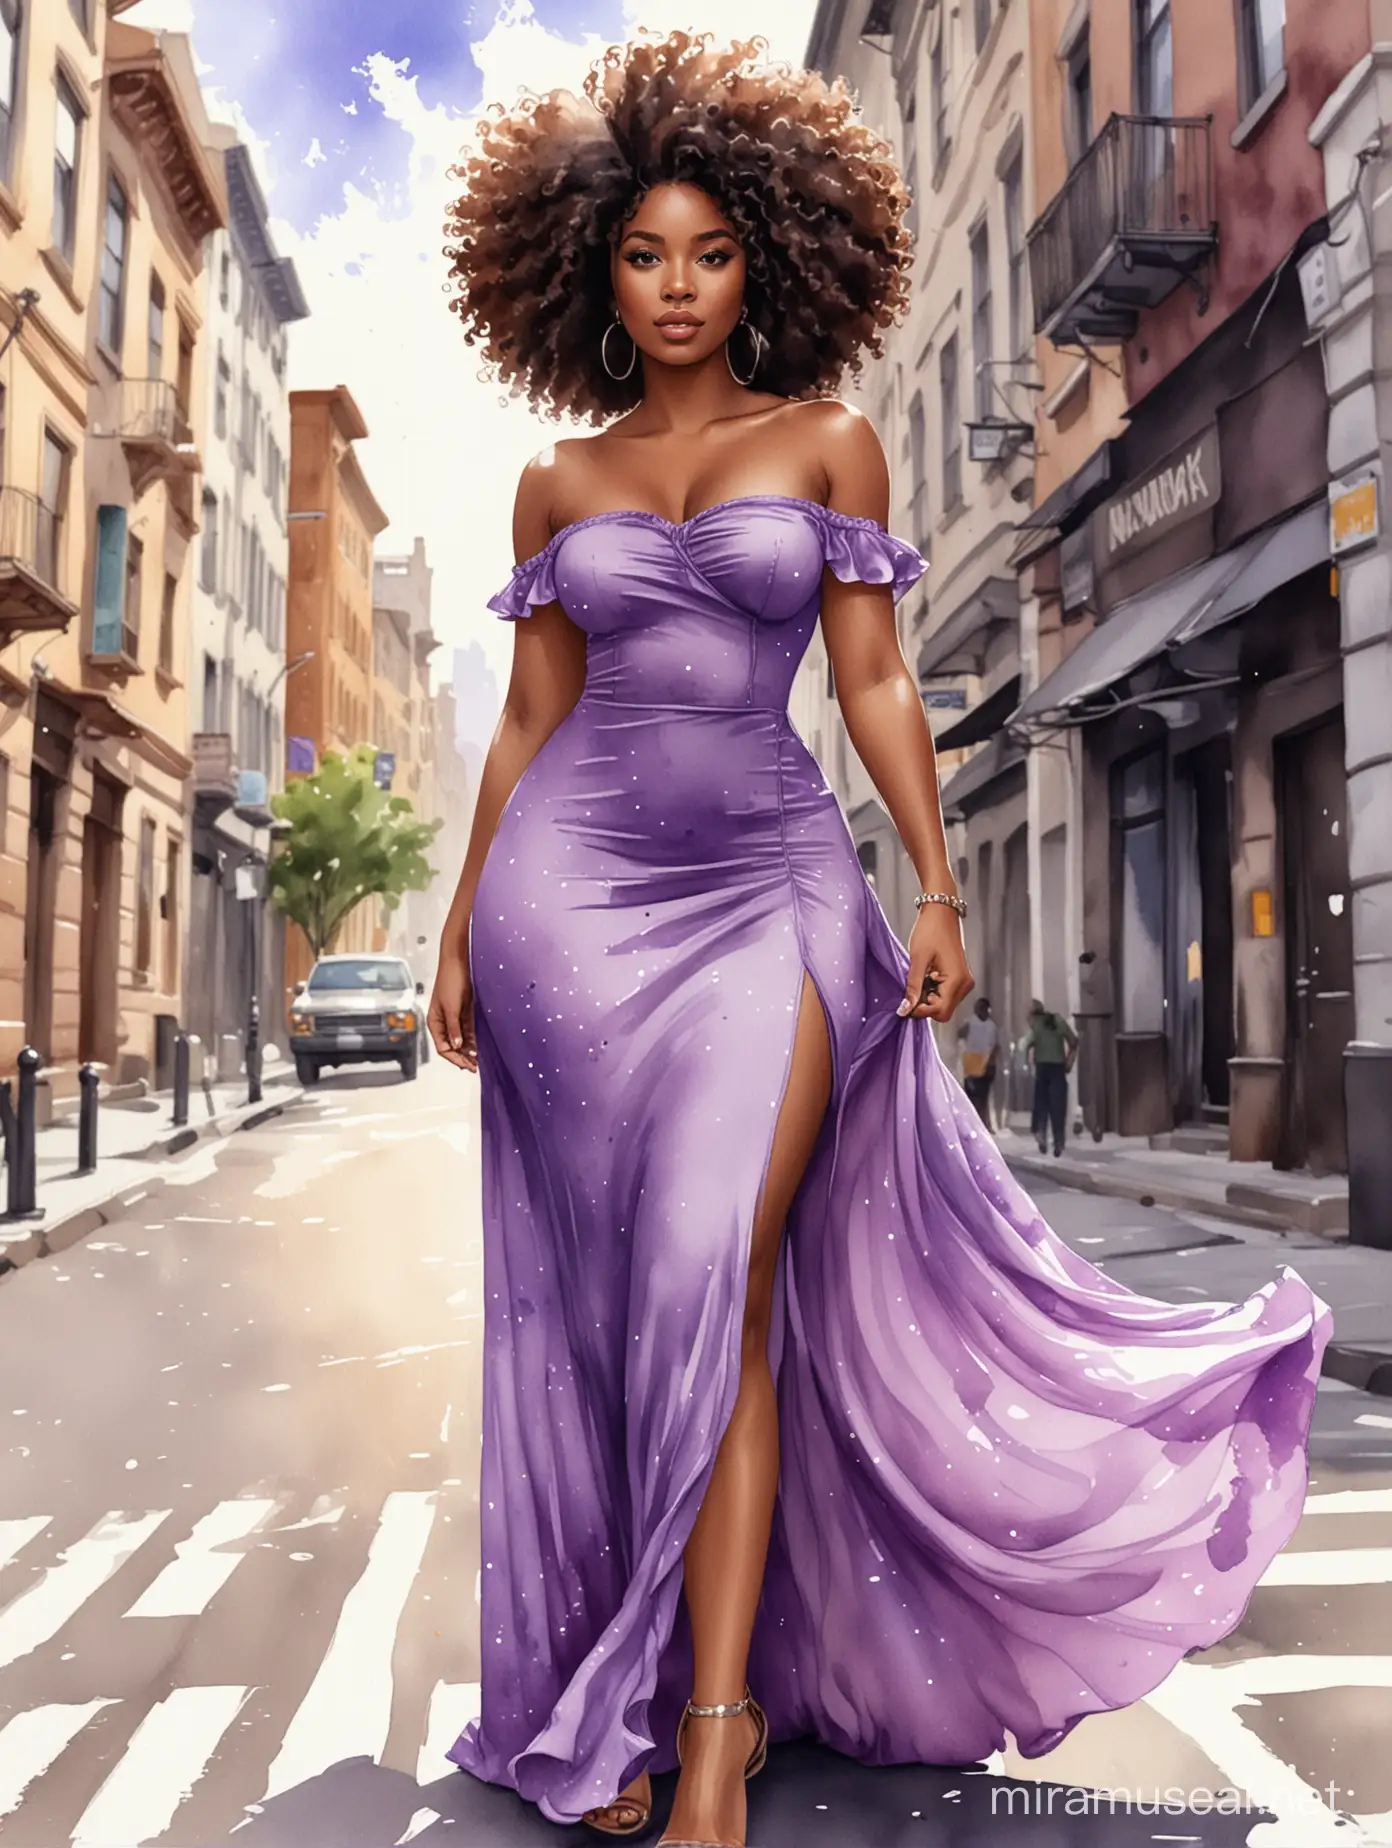 Create a watercolor cartoon image of a curvy black female walking thru the city streets wearing a purple off the shoulder maxi sundress. Prominent make up with brown eyes. Highly detailed tight curly black shiny afro